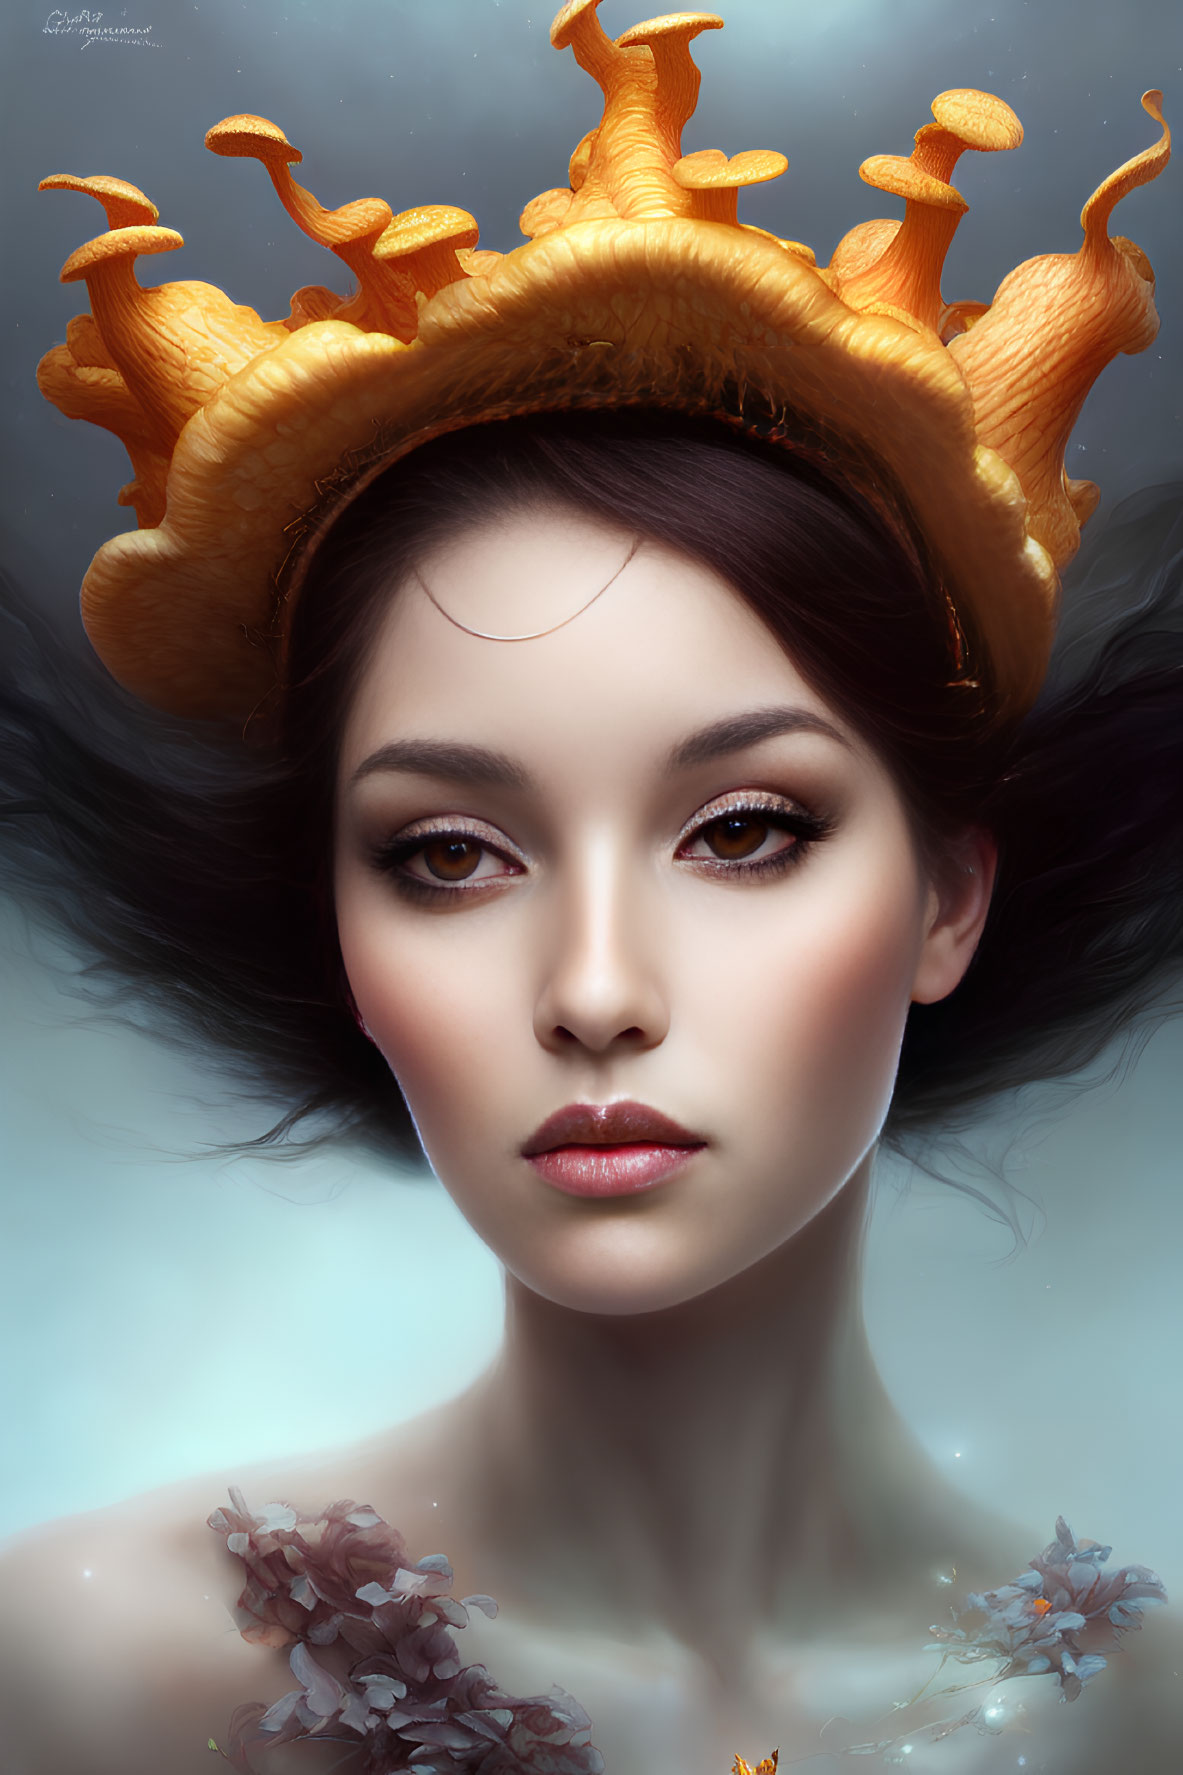 Portrait of woman with dark flowing hair, dramatic makeup, and whimsical orange crown with floral accents